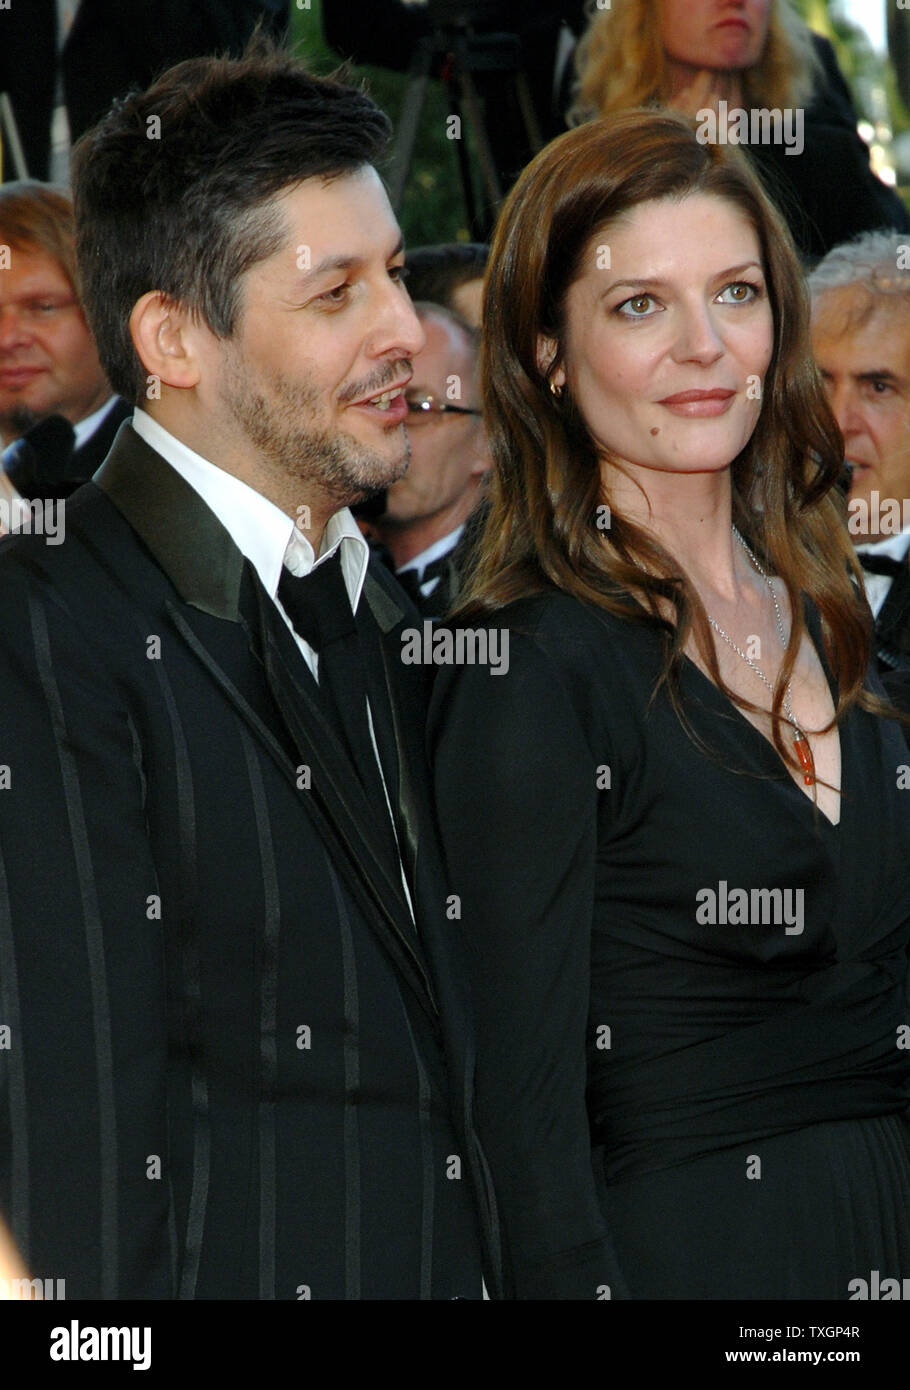 French director Christophe Honore (L) and actress Chiara Mastroianni, daughter of French star Catherine Deneuve and Italian star Marcello Mastroianni, arrive at the Palais des Festivals for the gala screening of 'Les Chansons d'Amour' at the 60th Cannes Film Festival in Cannes, France on May 18, 2007.  (UPI Photo/Christine Chew) Stock Photo